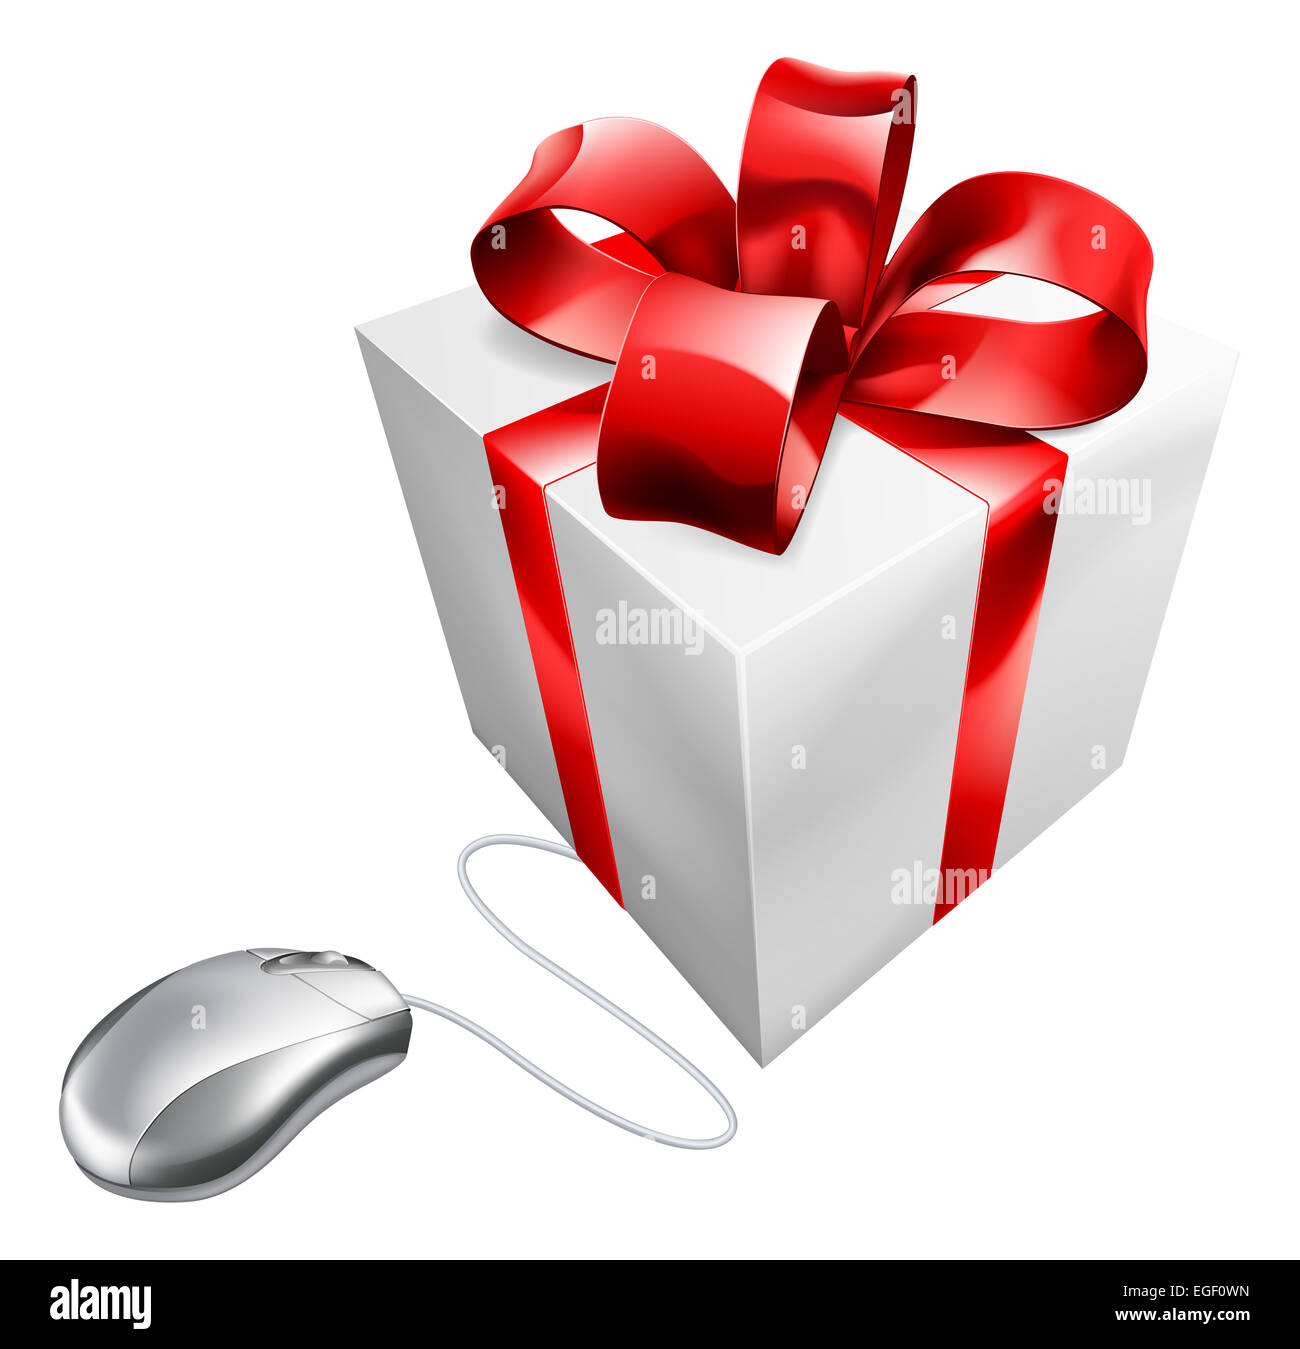 Present computer mouse online internet gift shopping concept of a computer mouse connected to a present. Could be concept for vo Stock Photo